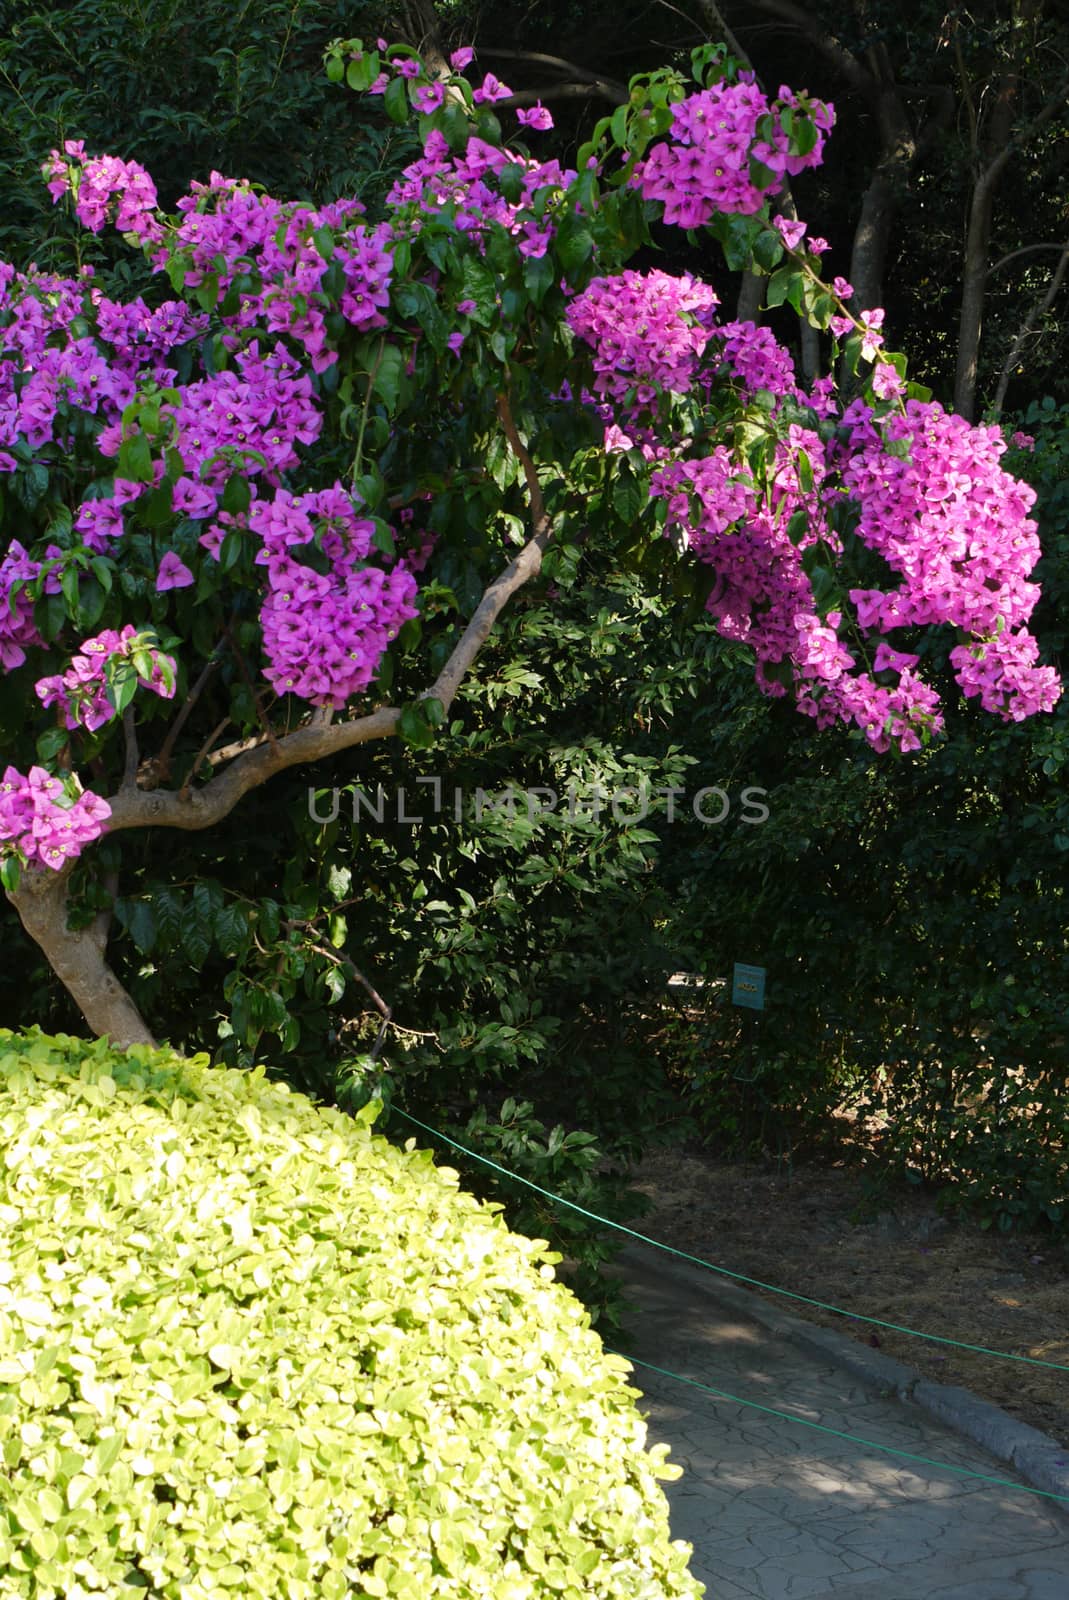 A small tree with beautiful small pink inflorescences against a neatly trimmed round green bush